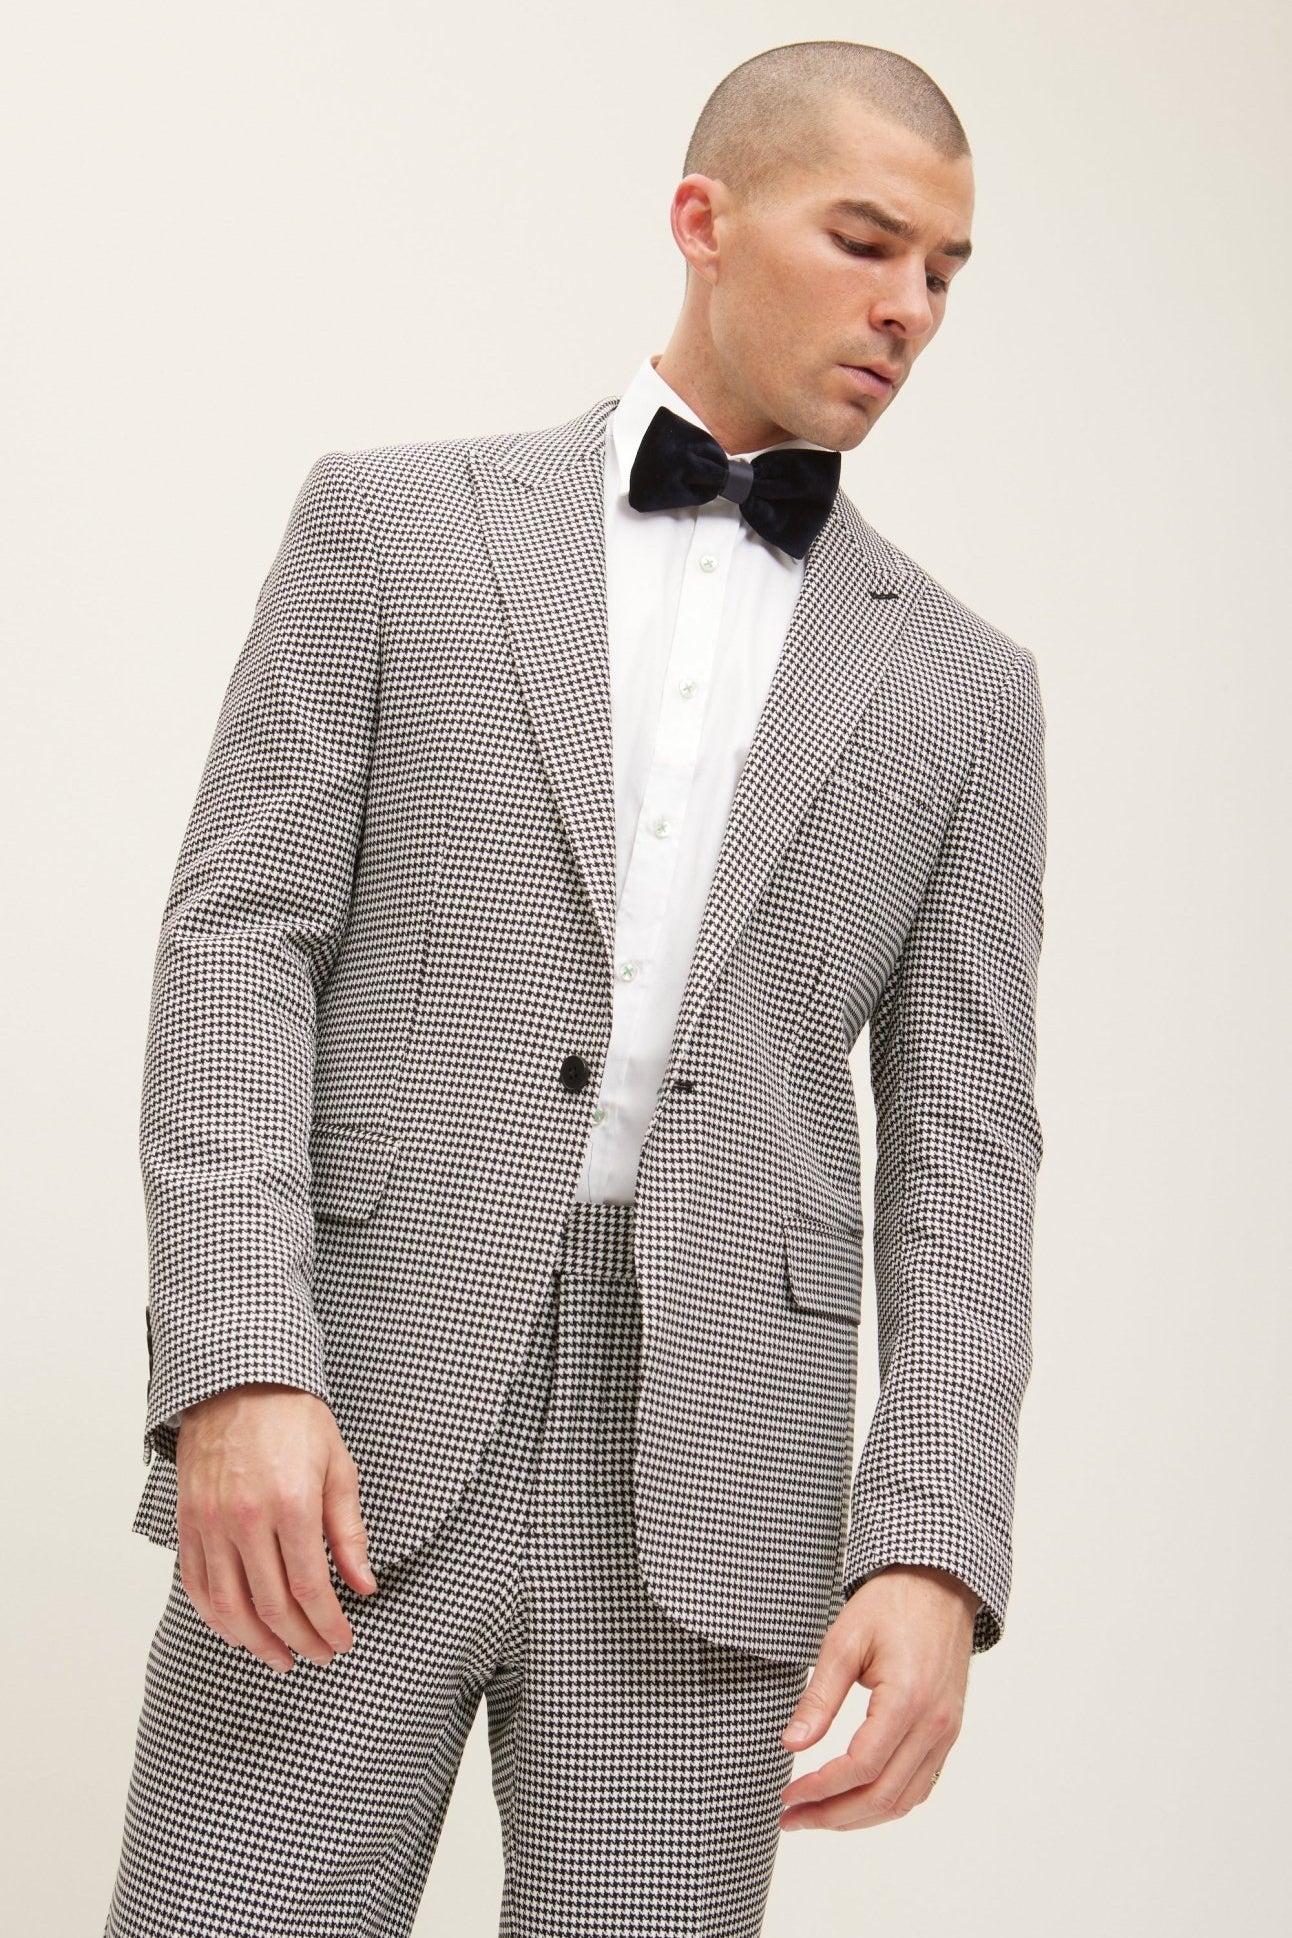 Tailored Fit Peak Lapel Petite Houndstooth Suit With Matching Pants - Ron Tomson